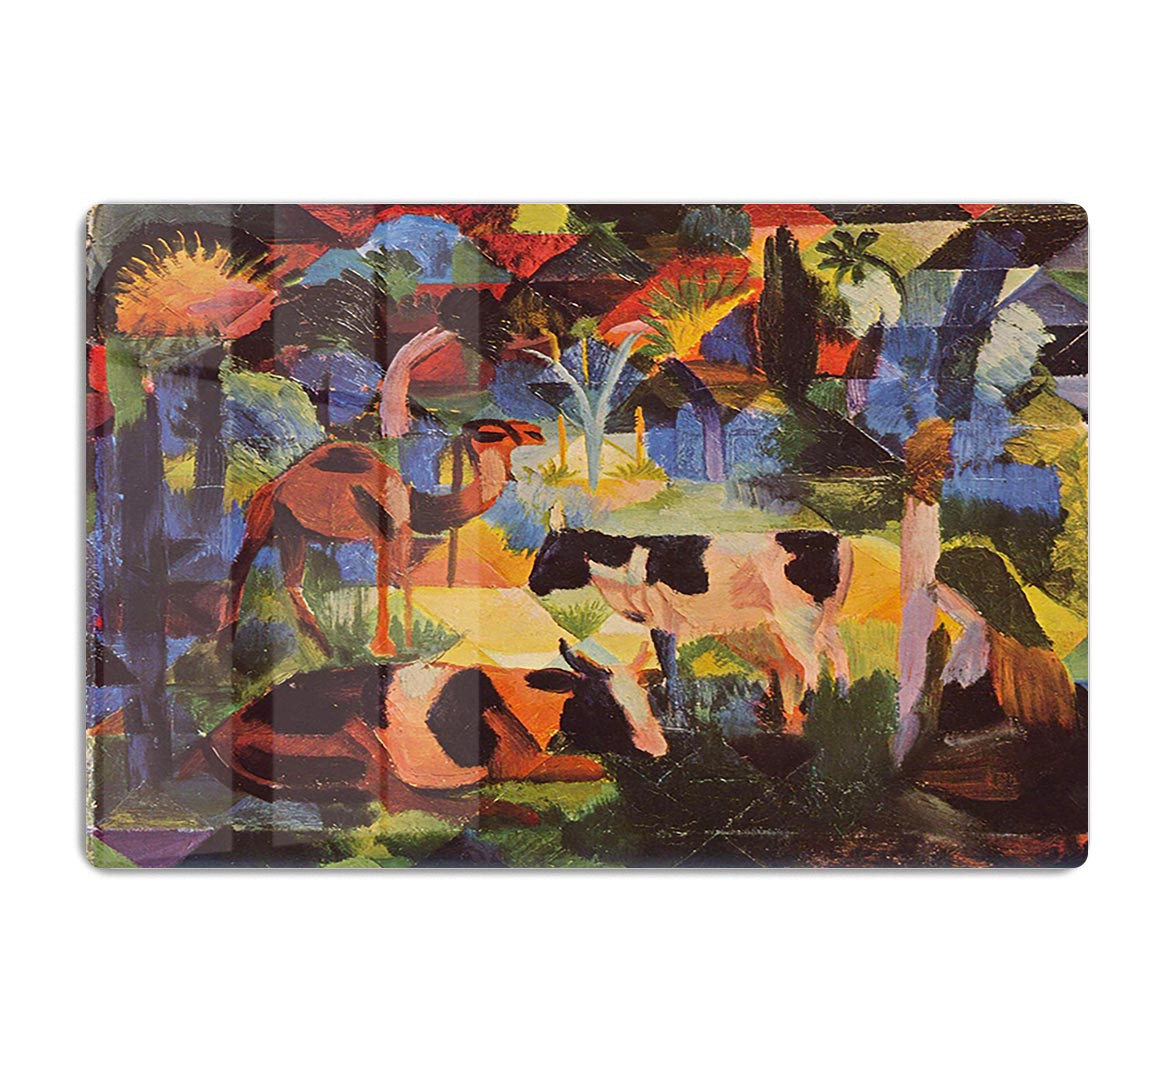 Landscape with cows and camels by Macke Acrylic Block - Canvas Art Rocks - 1